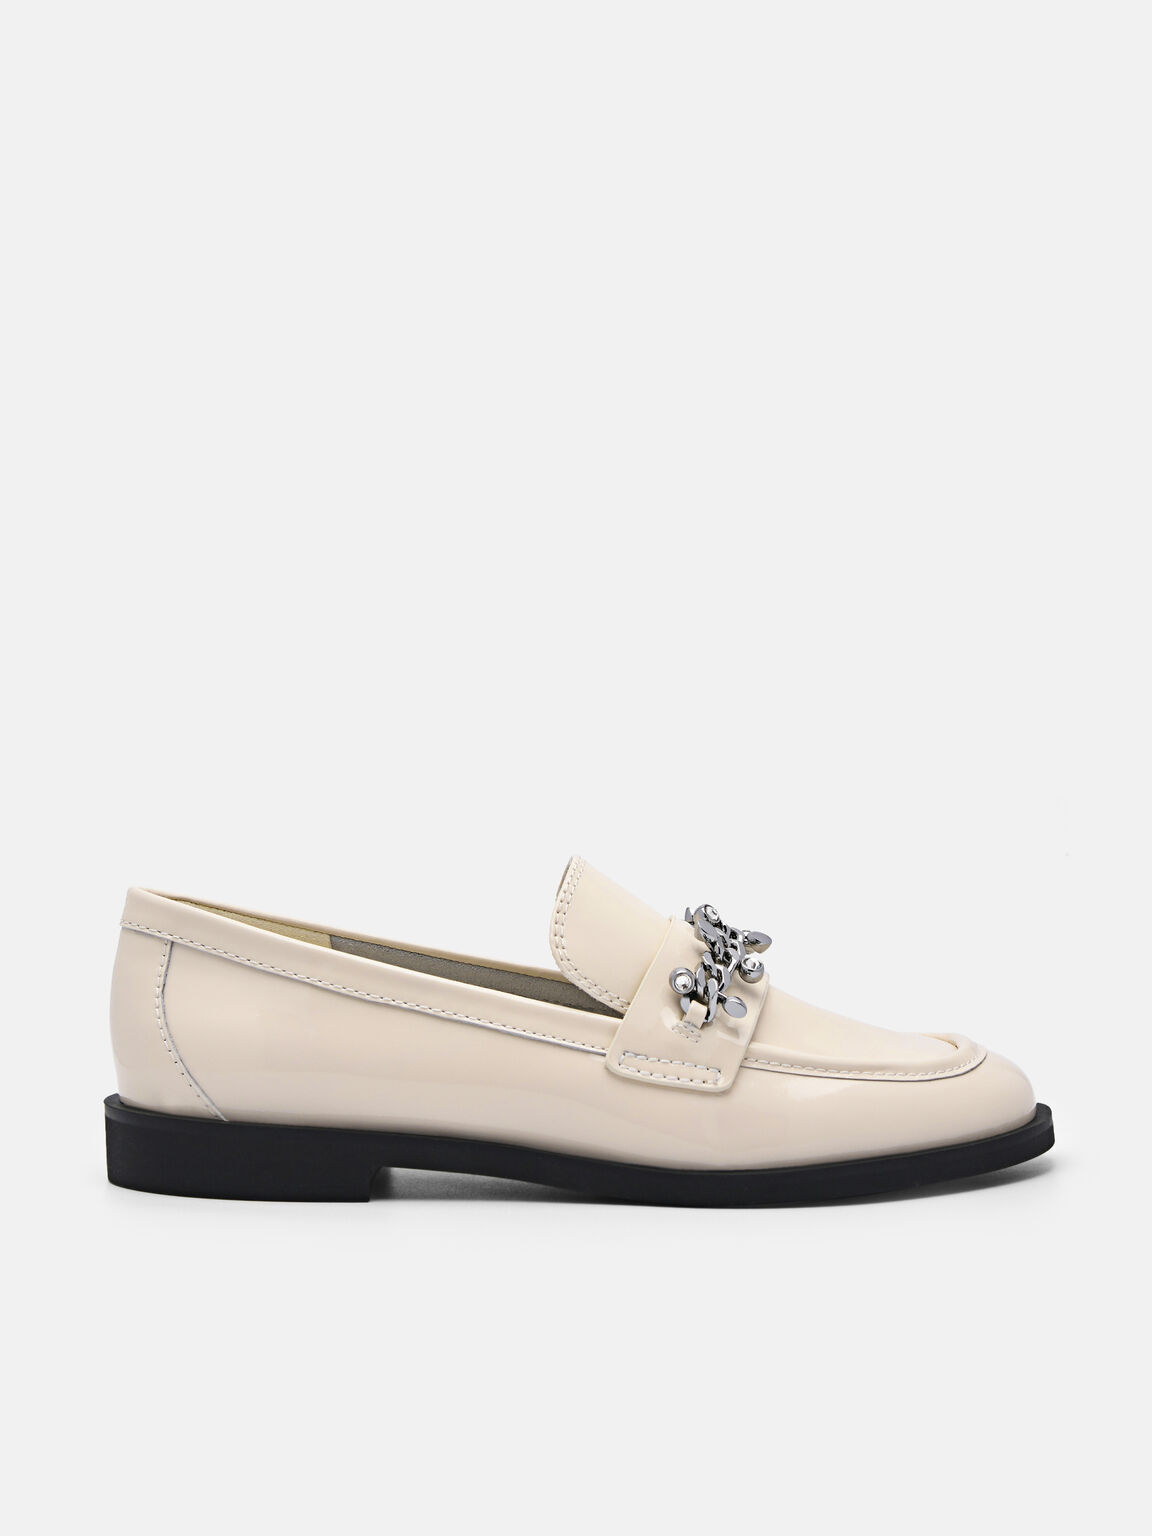 Cami Leather Loafers, Beige, hi-res